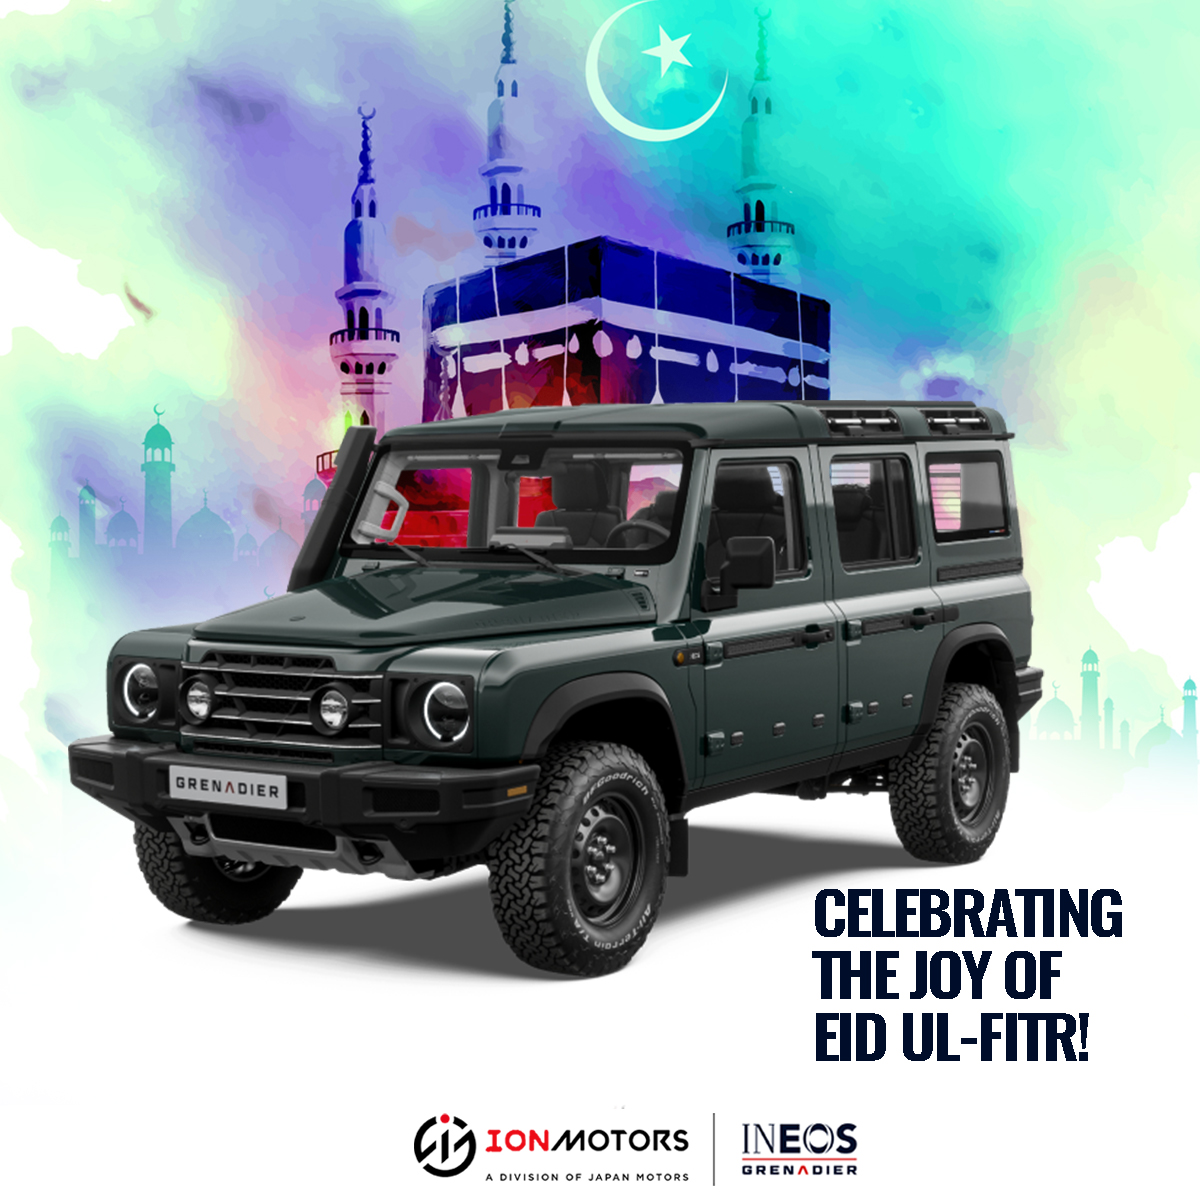 From our families to yours, we wish you a blessed Eid filled with love, happiness and peace.
Eid Mubarak!

#EidMubarak #EidUlFitr #IonMotors #IneosGrenadier #Grenadier #Grenadier4x4